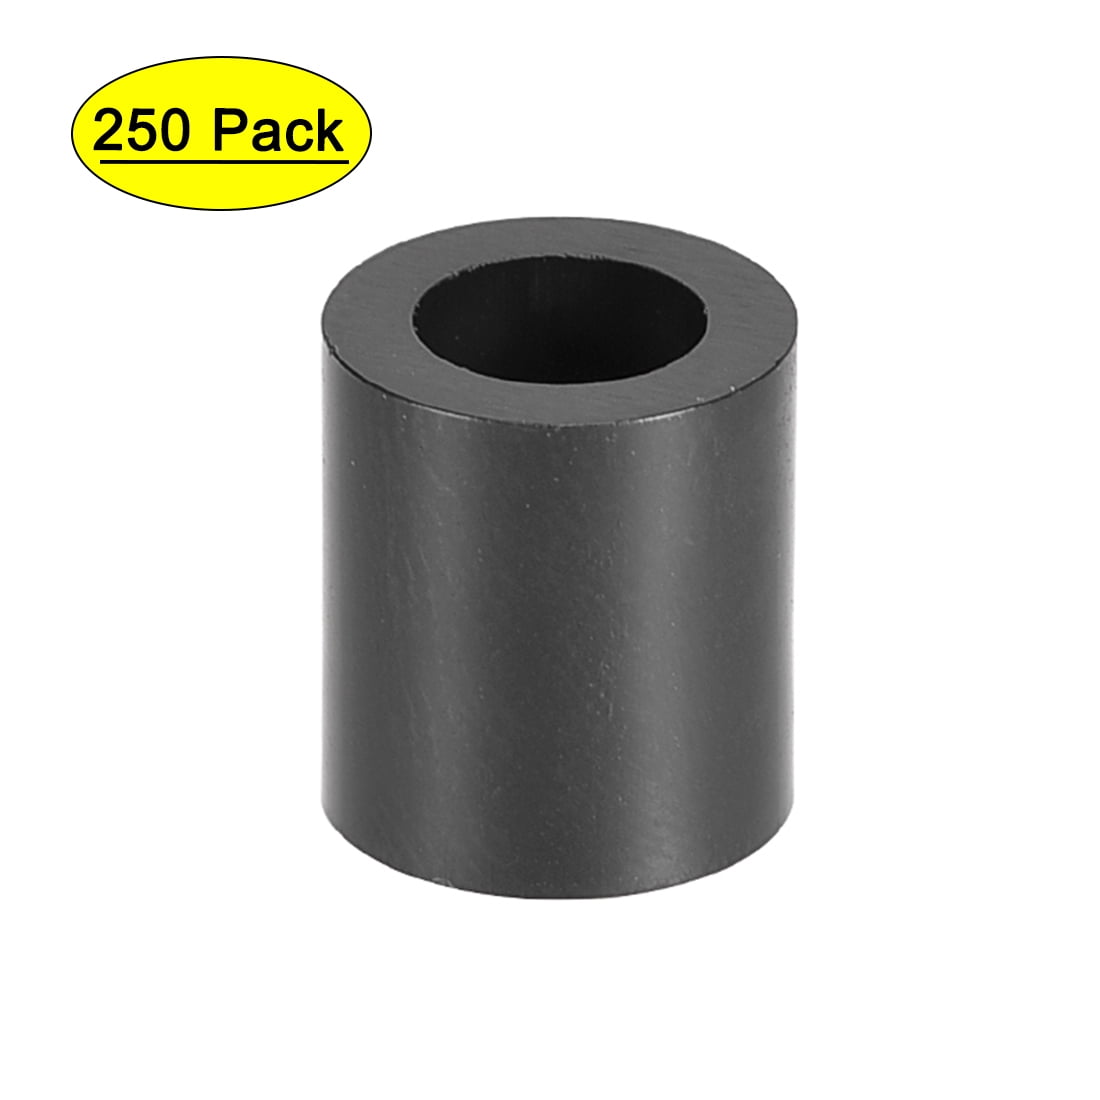 ABS Round Spacer Washer 5.4mm ID 9mm OD 10mm Height for M5 Screws Black 250Pcs 